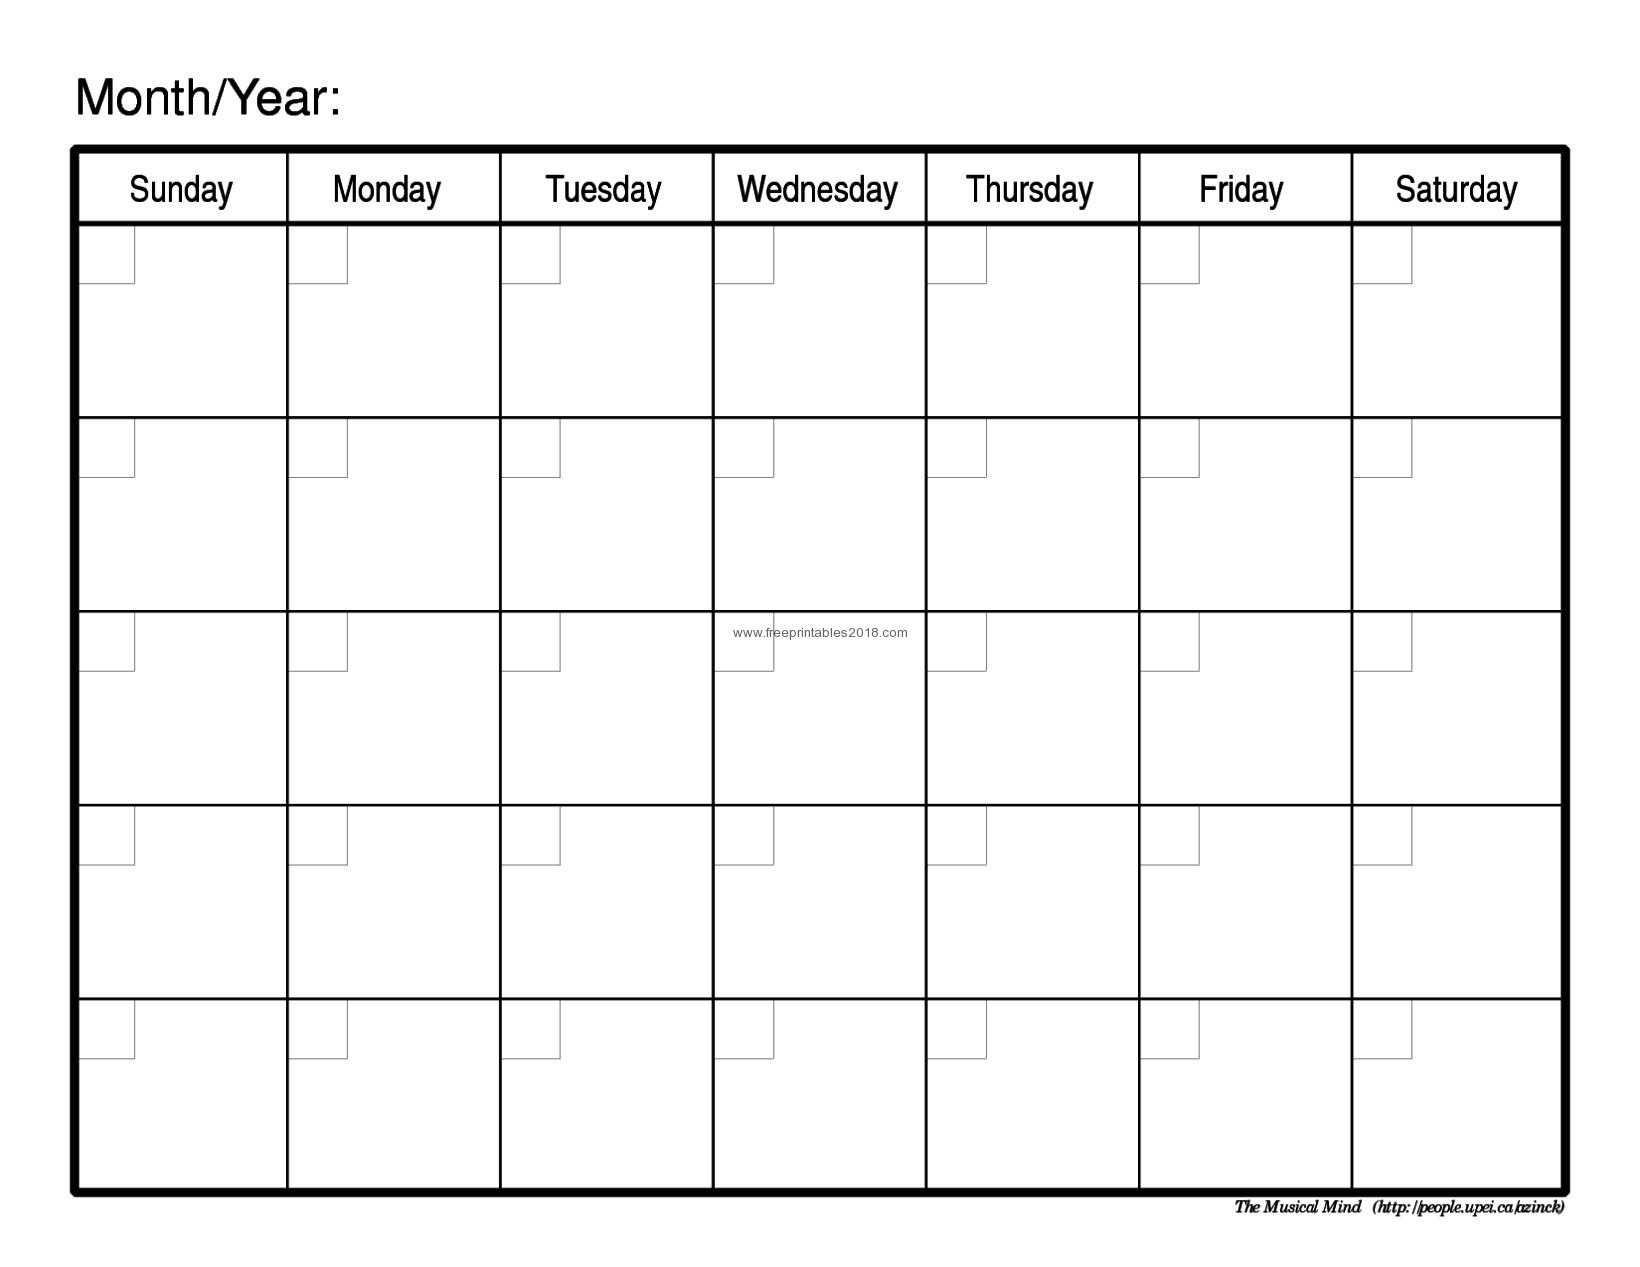 003 Free Printable Calendar Blank Templates Monthly Of With Full Page Blank Calendar Template